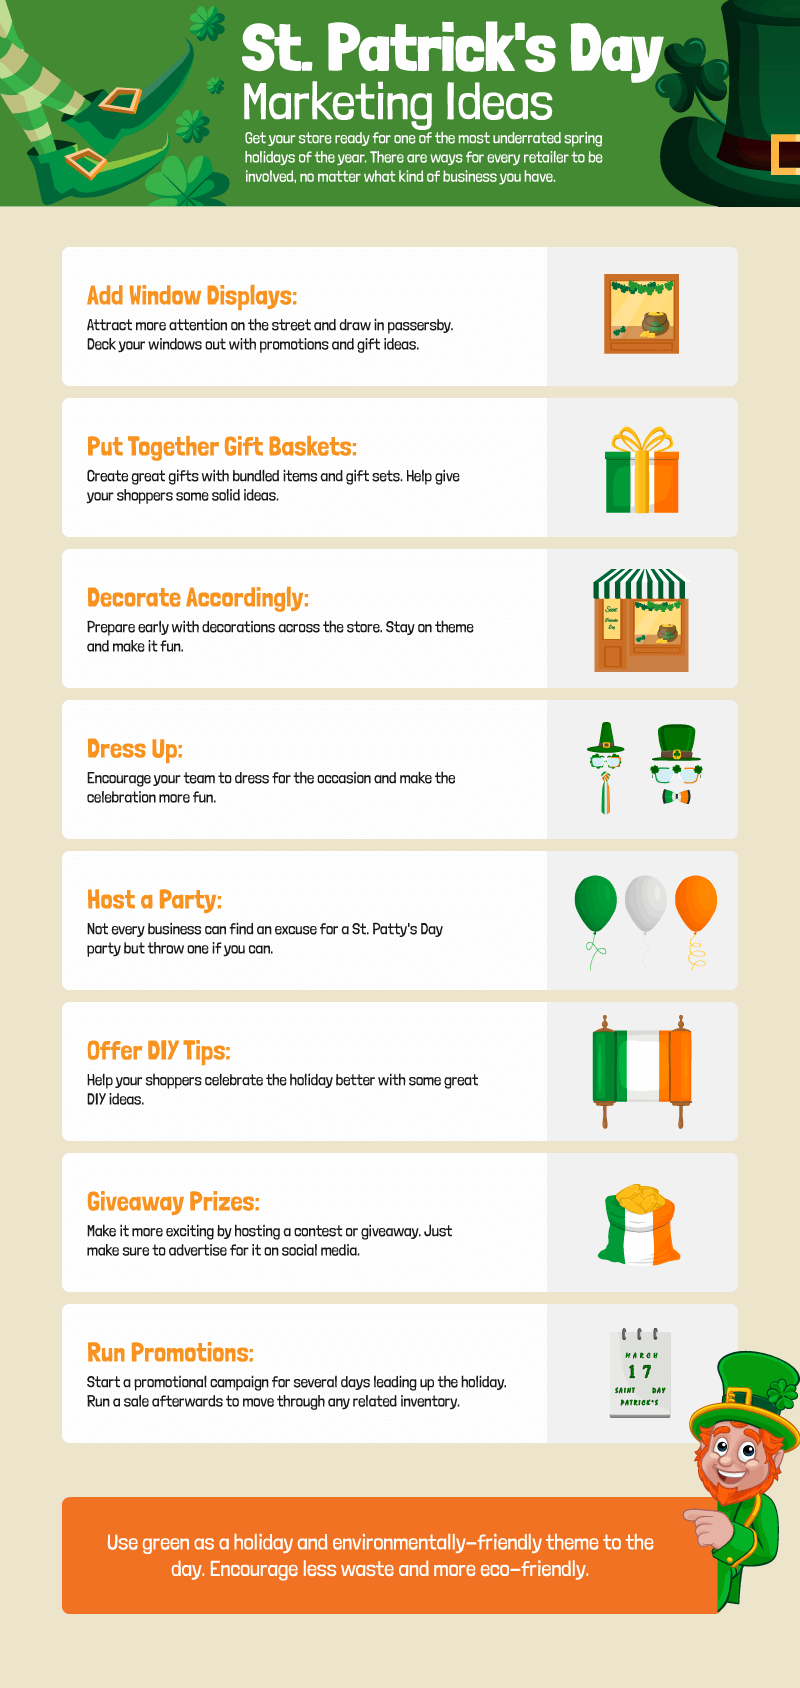 an infographic showing St. Patrick's Day marketing ideas